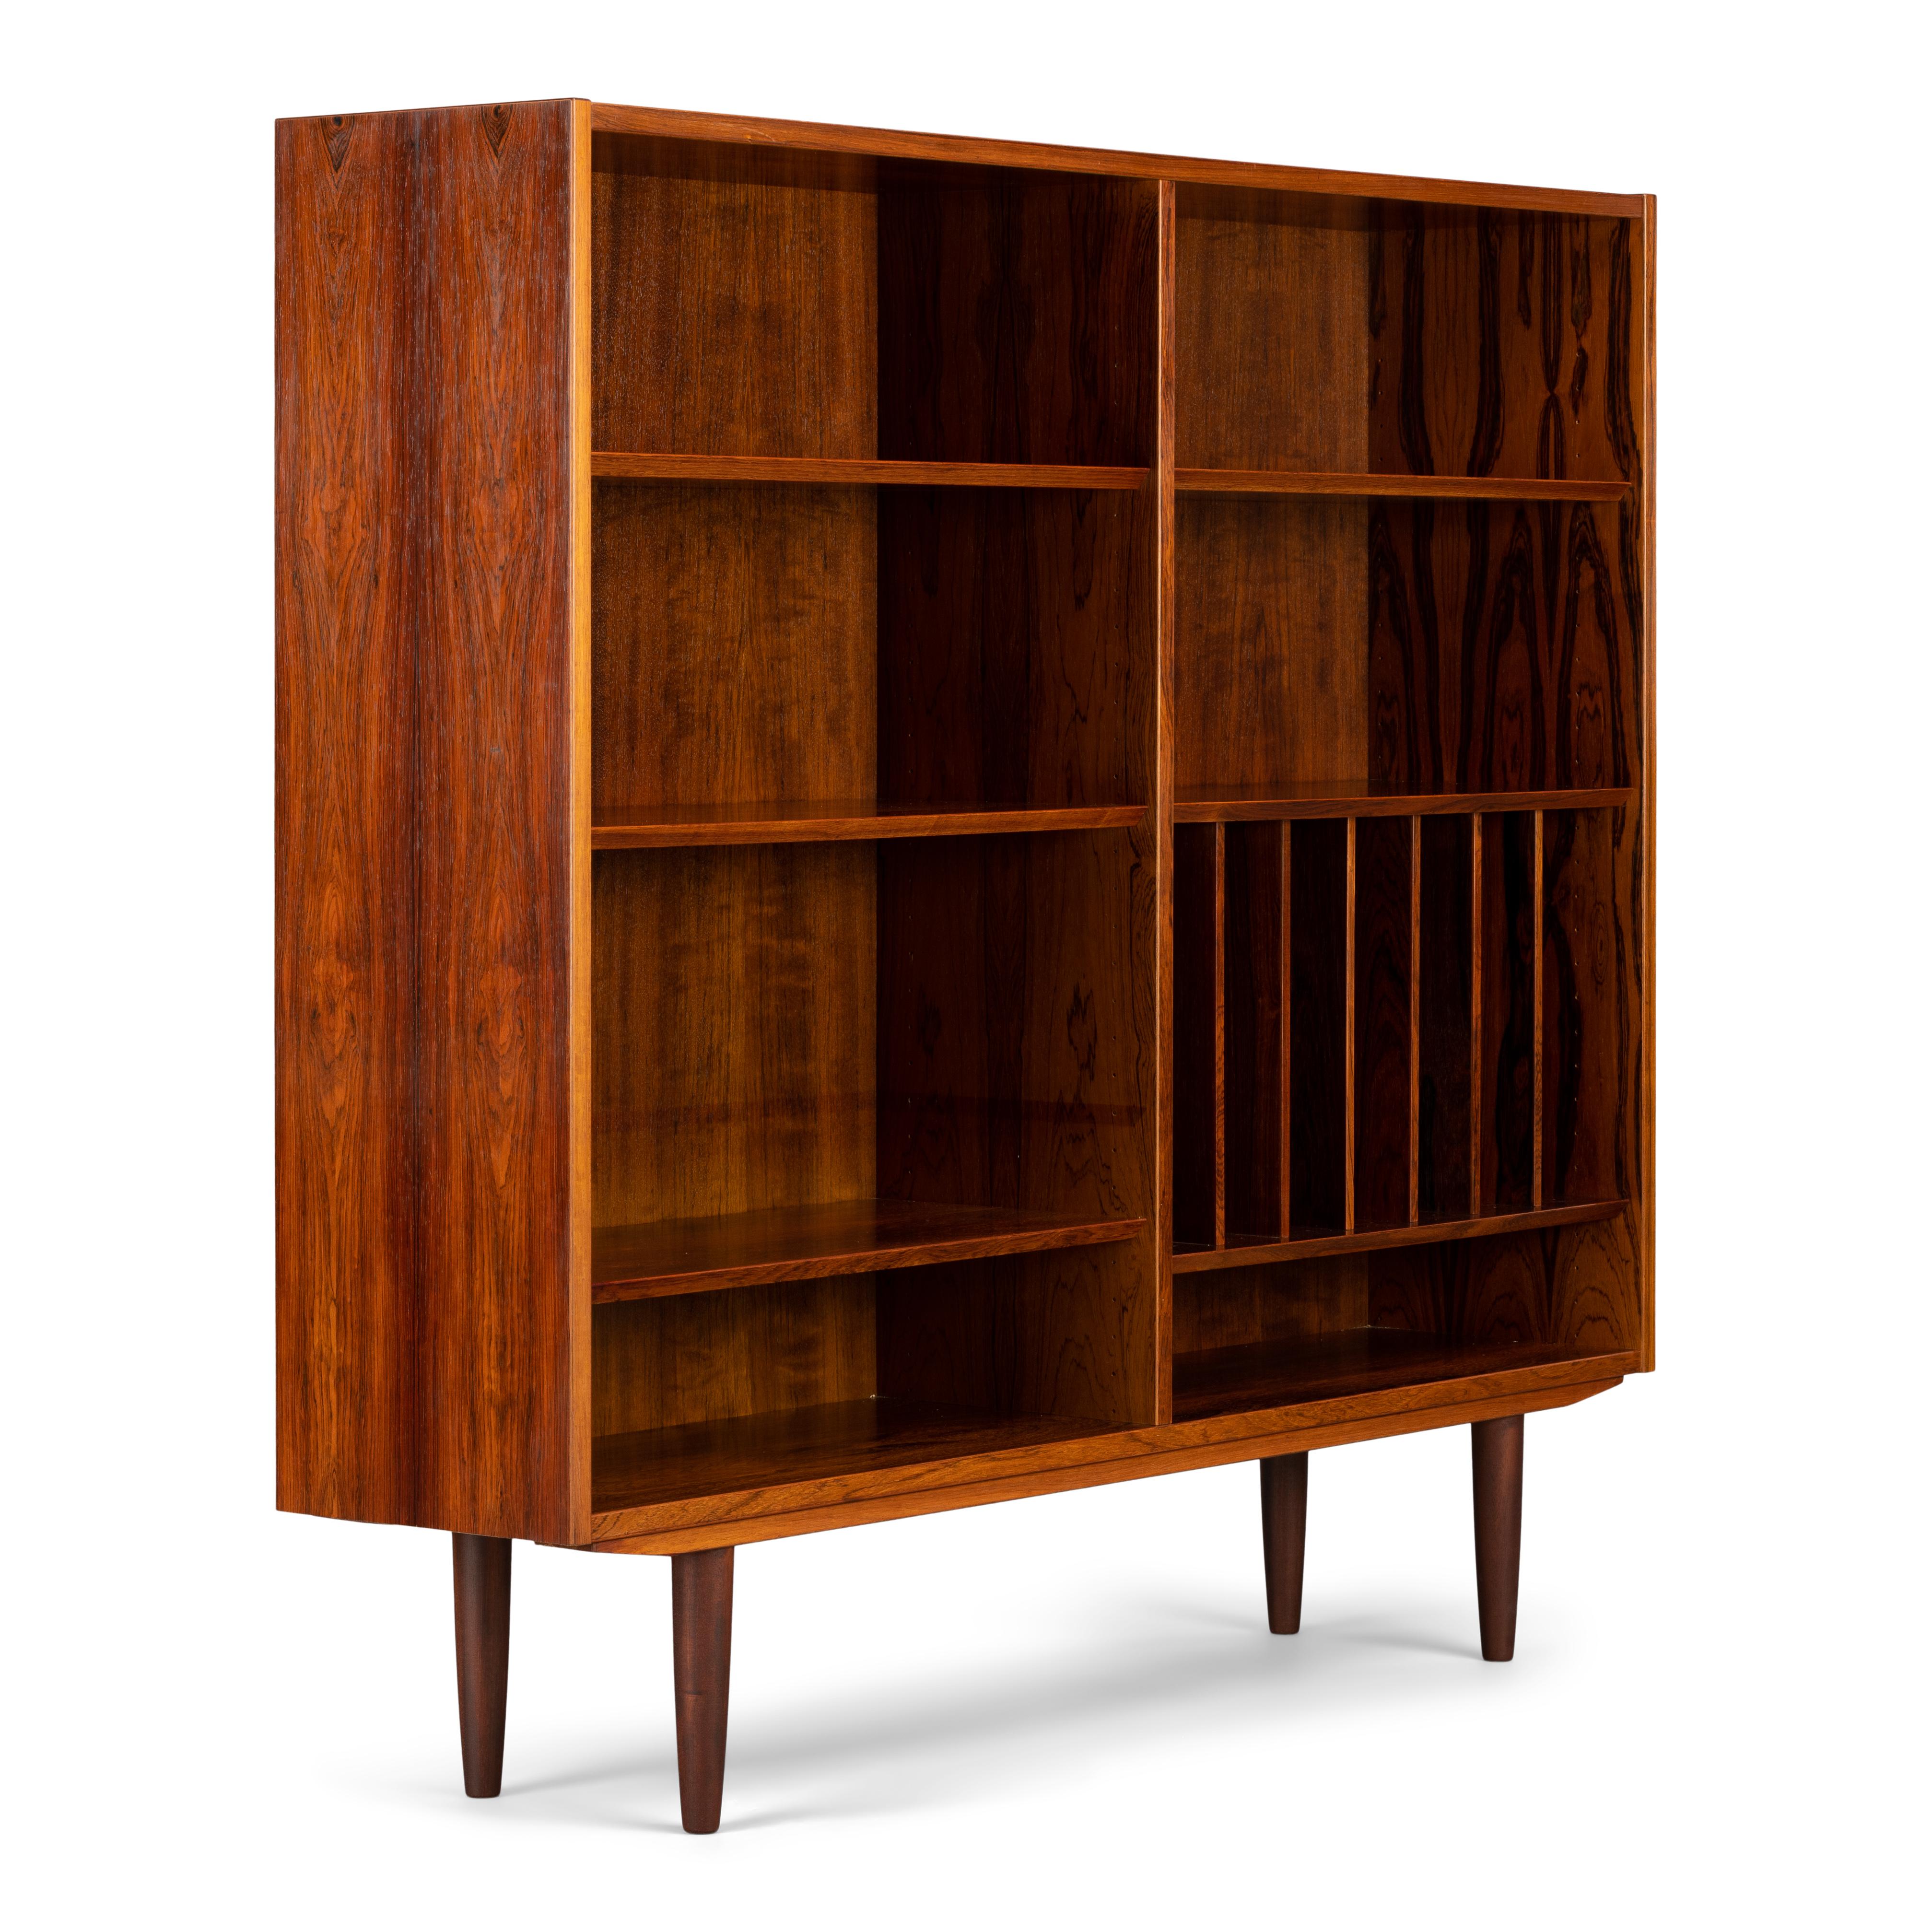 Danish rare tall bookcase in beautiful hardwood veneer. Designed by Carlo Jensen and made by Hundevad & Co. This bookcase is in very good vintage condition and has a total of 6 height-adjustable shelves divided across the two halves of the bookcase.